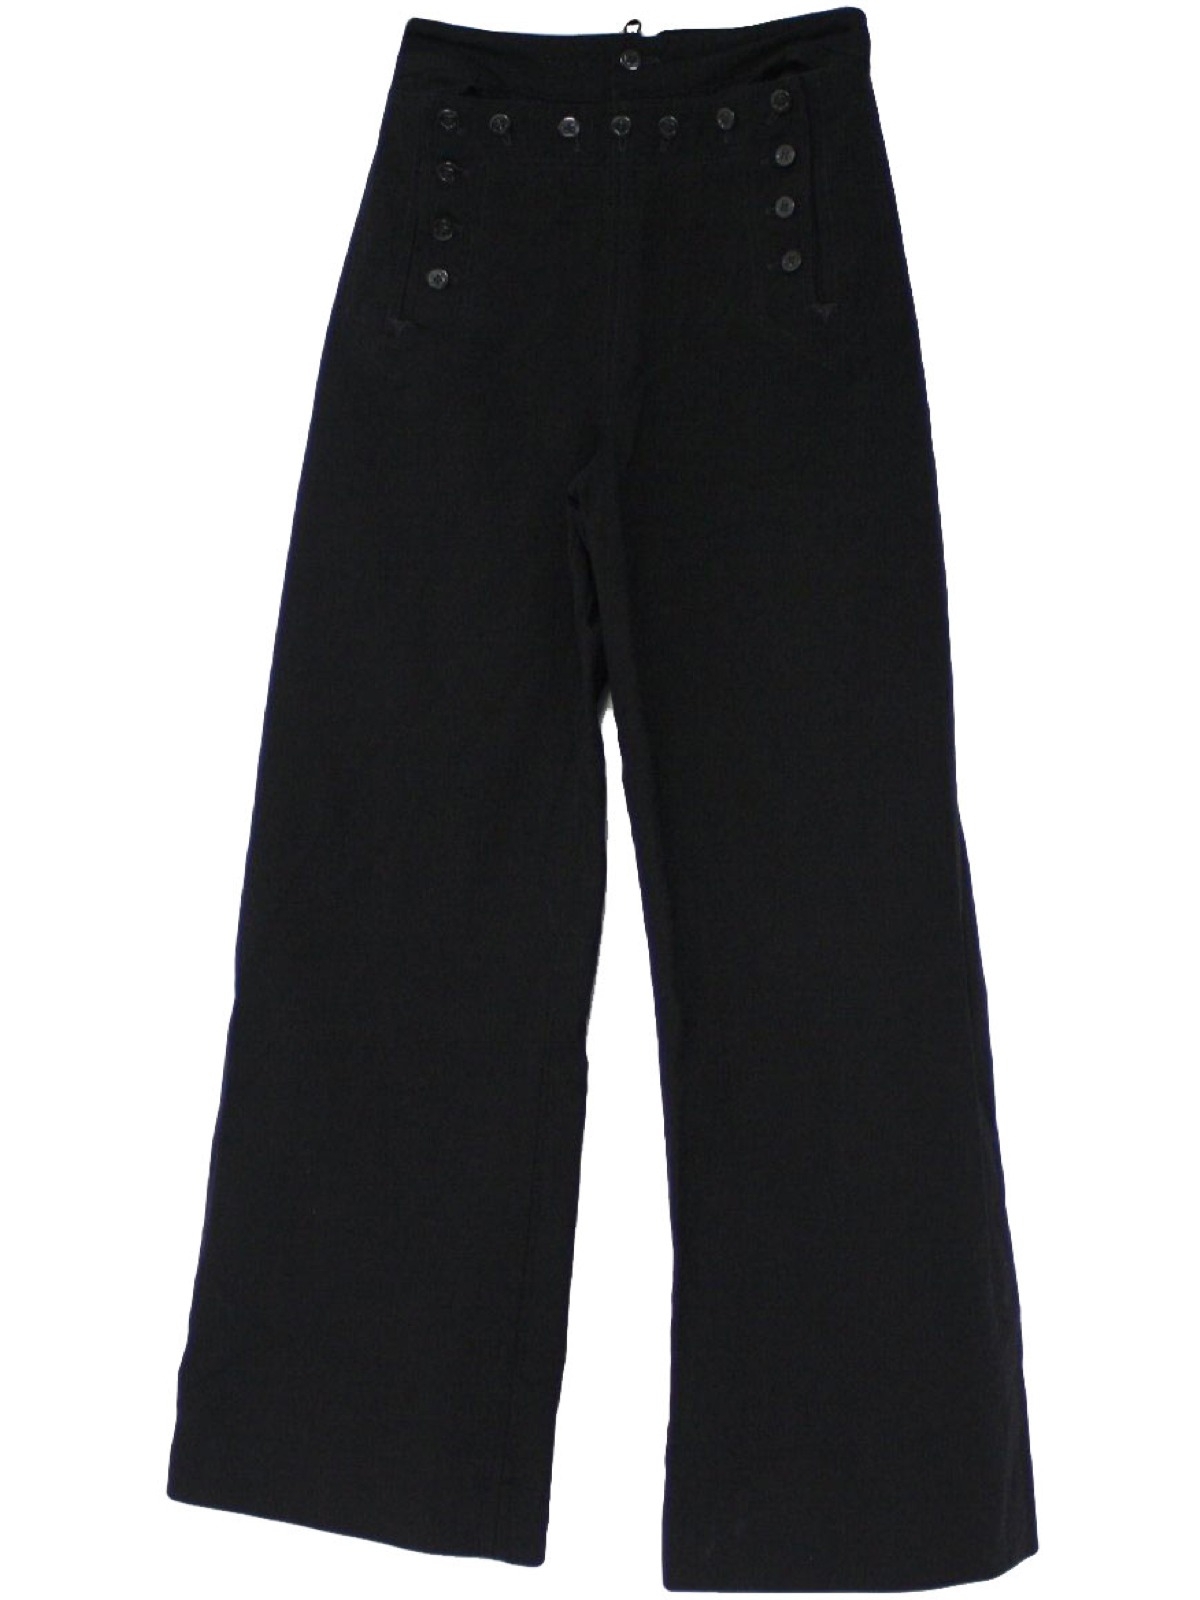 Navy Issue 1970s Vintage Bellbottom Pants: 70s -Navy Issue- Mens blue ...